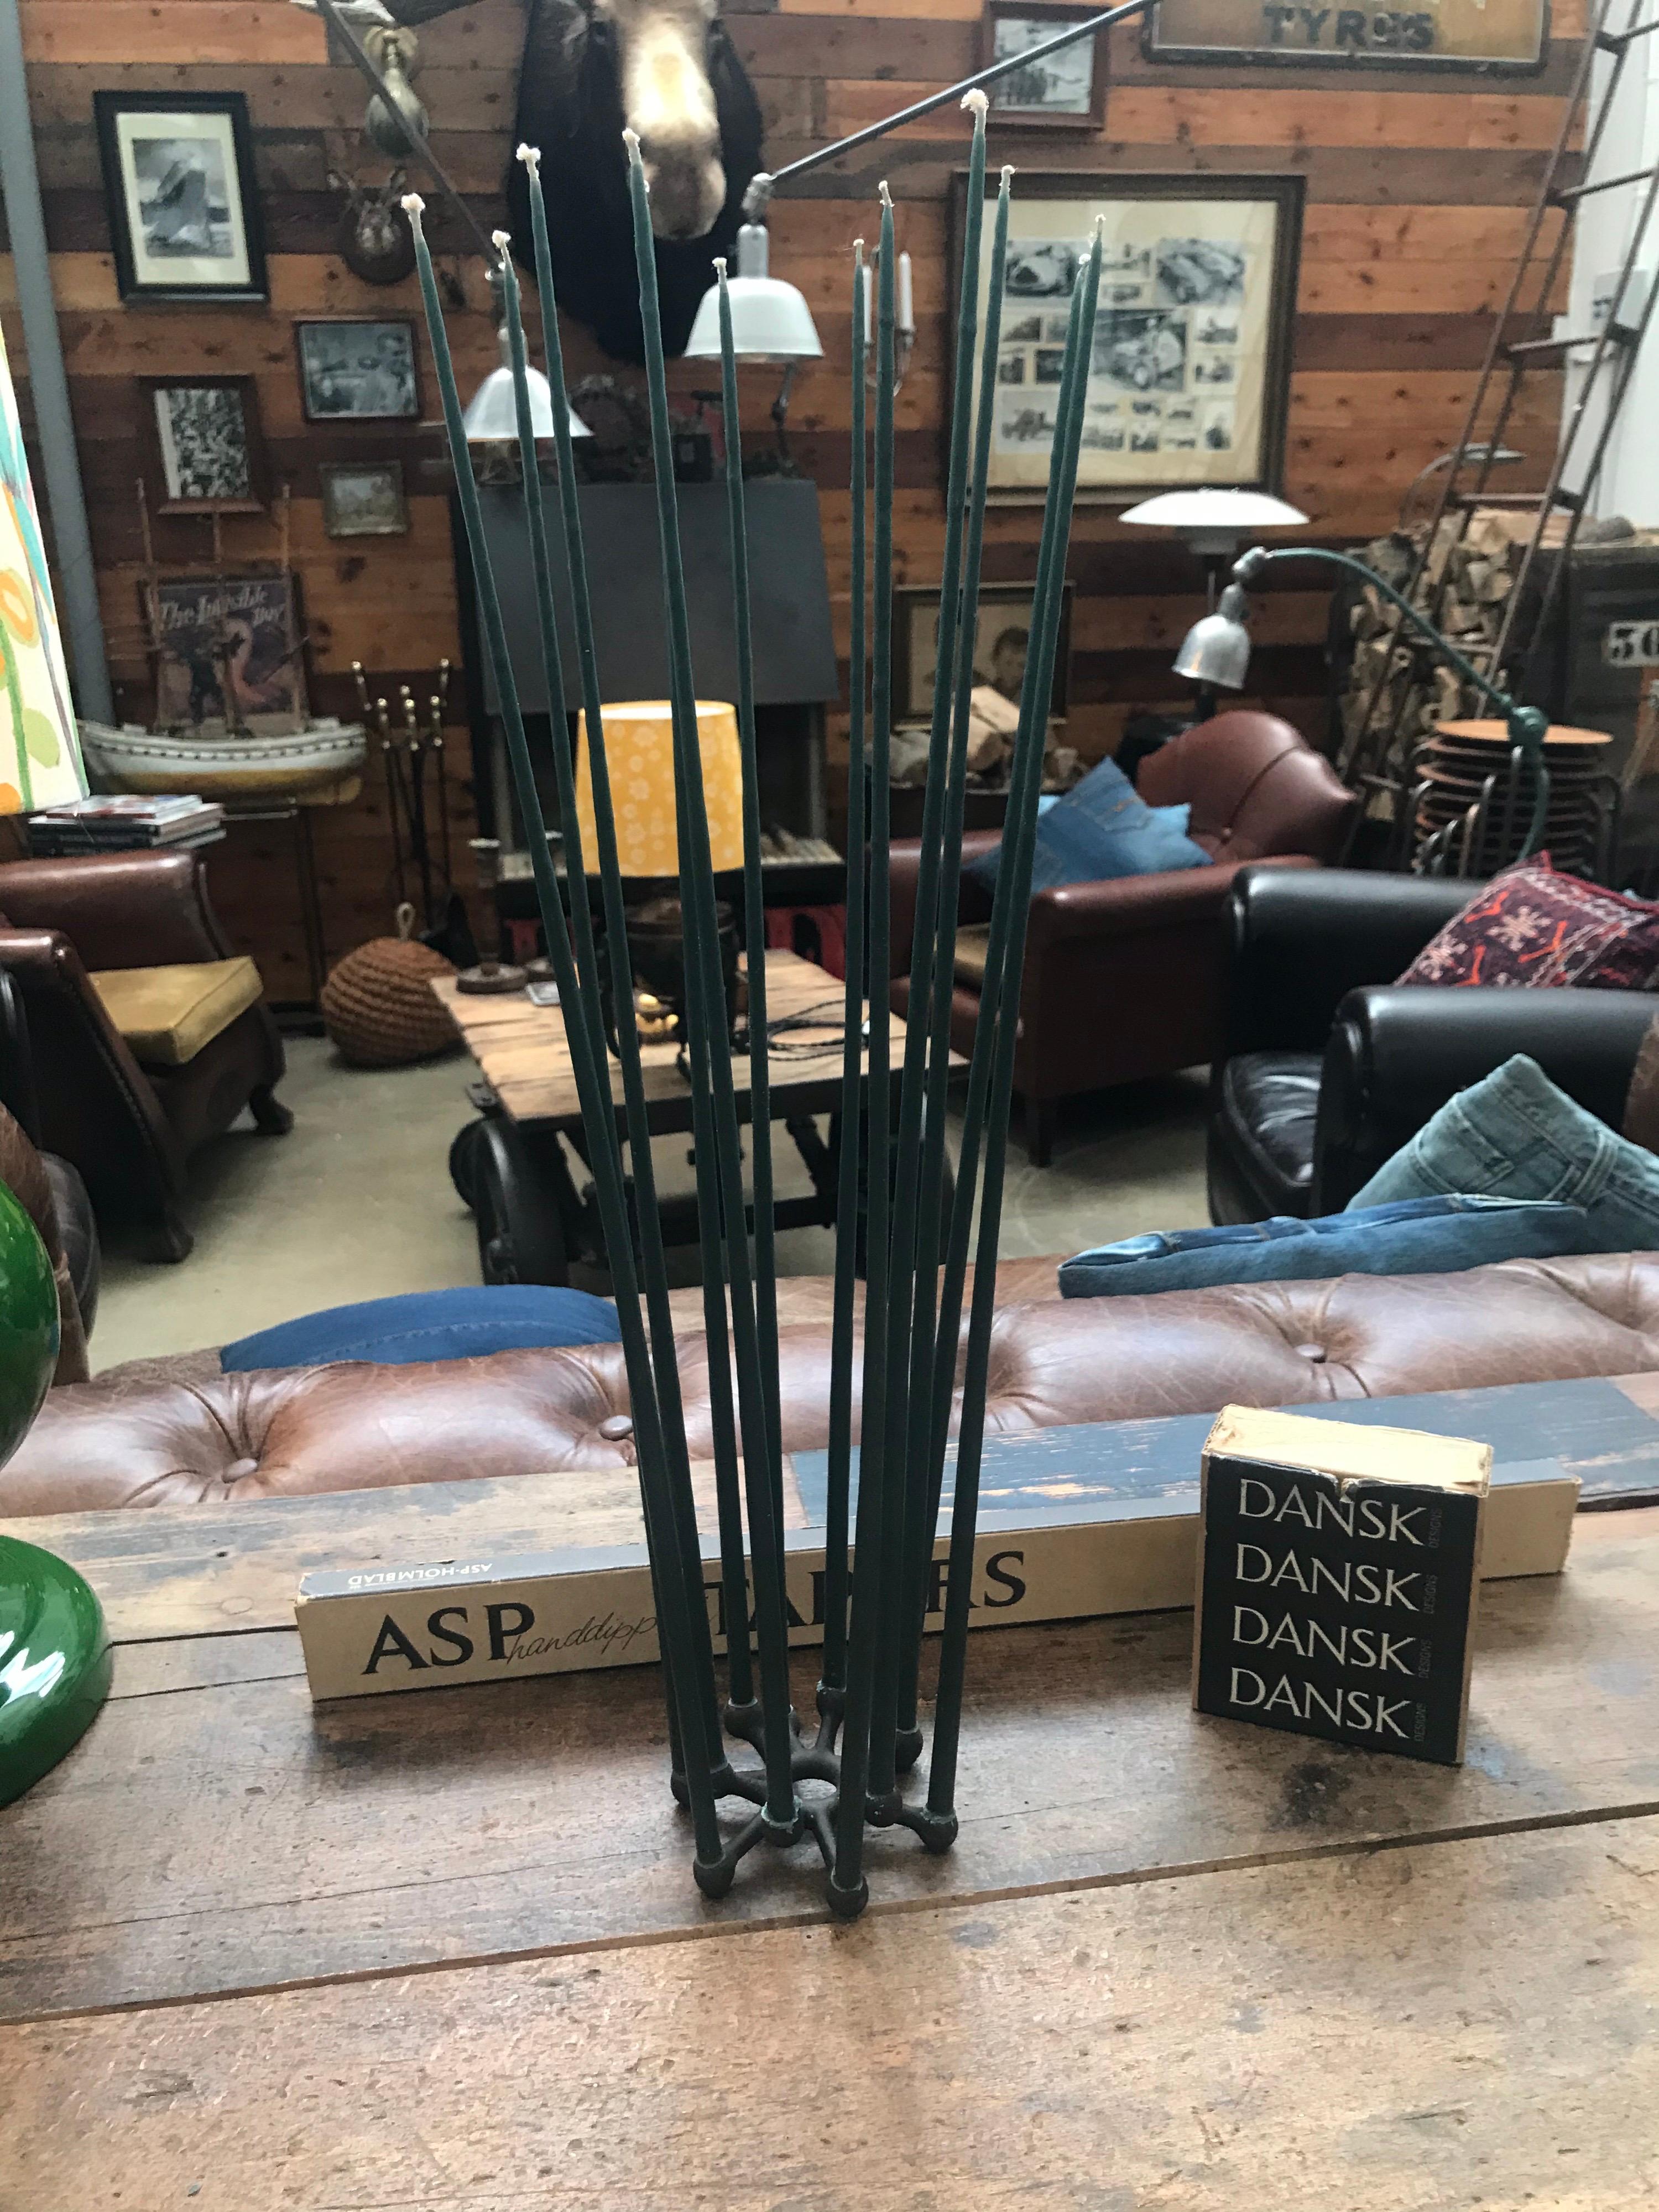 Amazing Danish cast iron candleholder by Jens H. Quistgaard for Pato. 
Comes with a box of 12 hand dipped tappers candles NOS new old stock in the original box.

Jens Harald Quistgaard (April 23, 1919 – January 4, 2008) was a Danish sculptor and